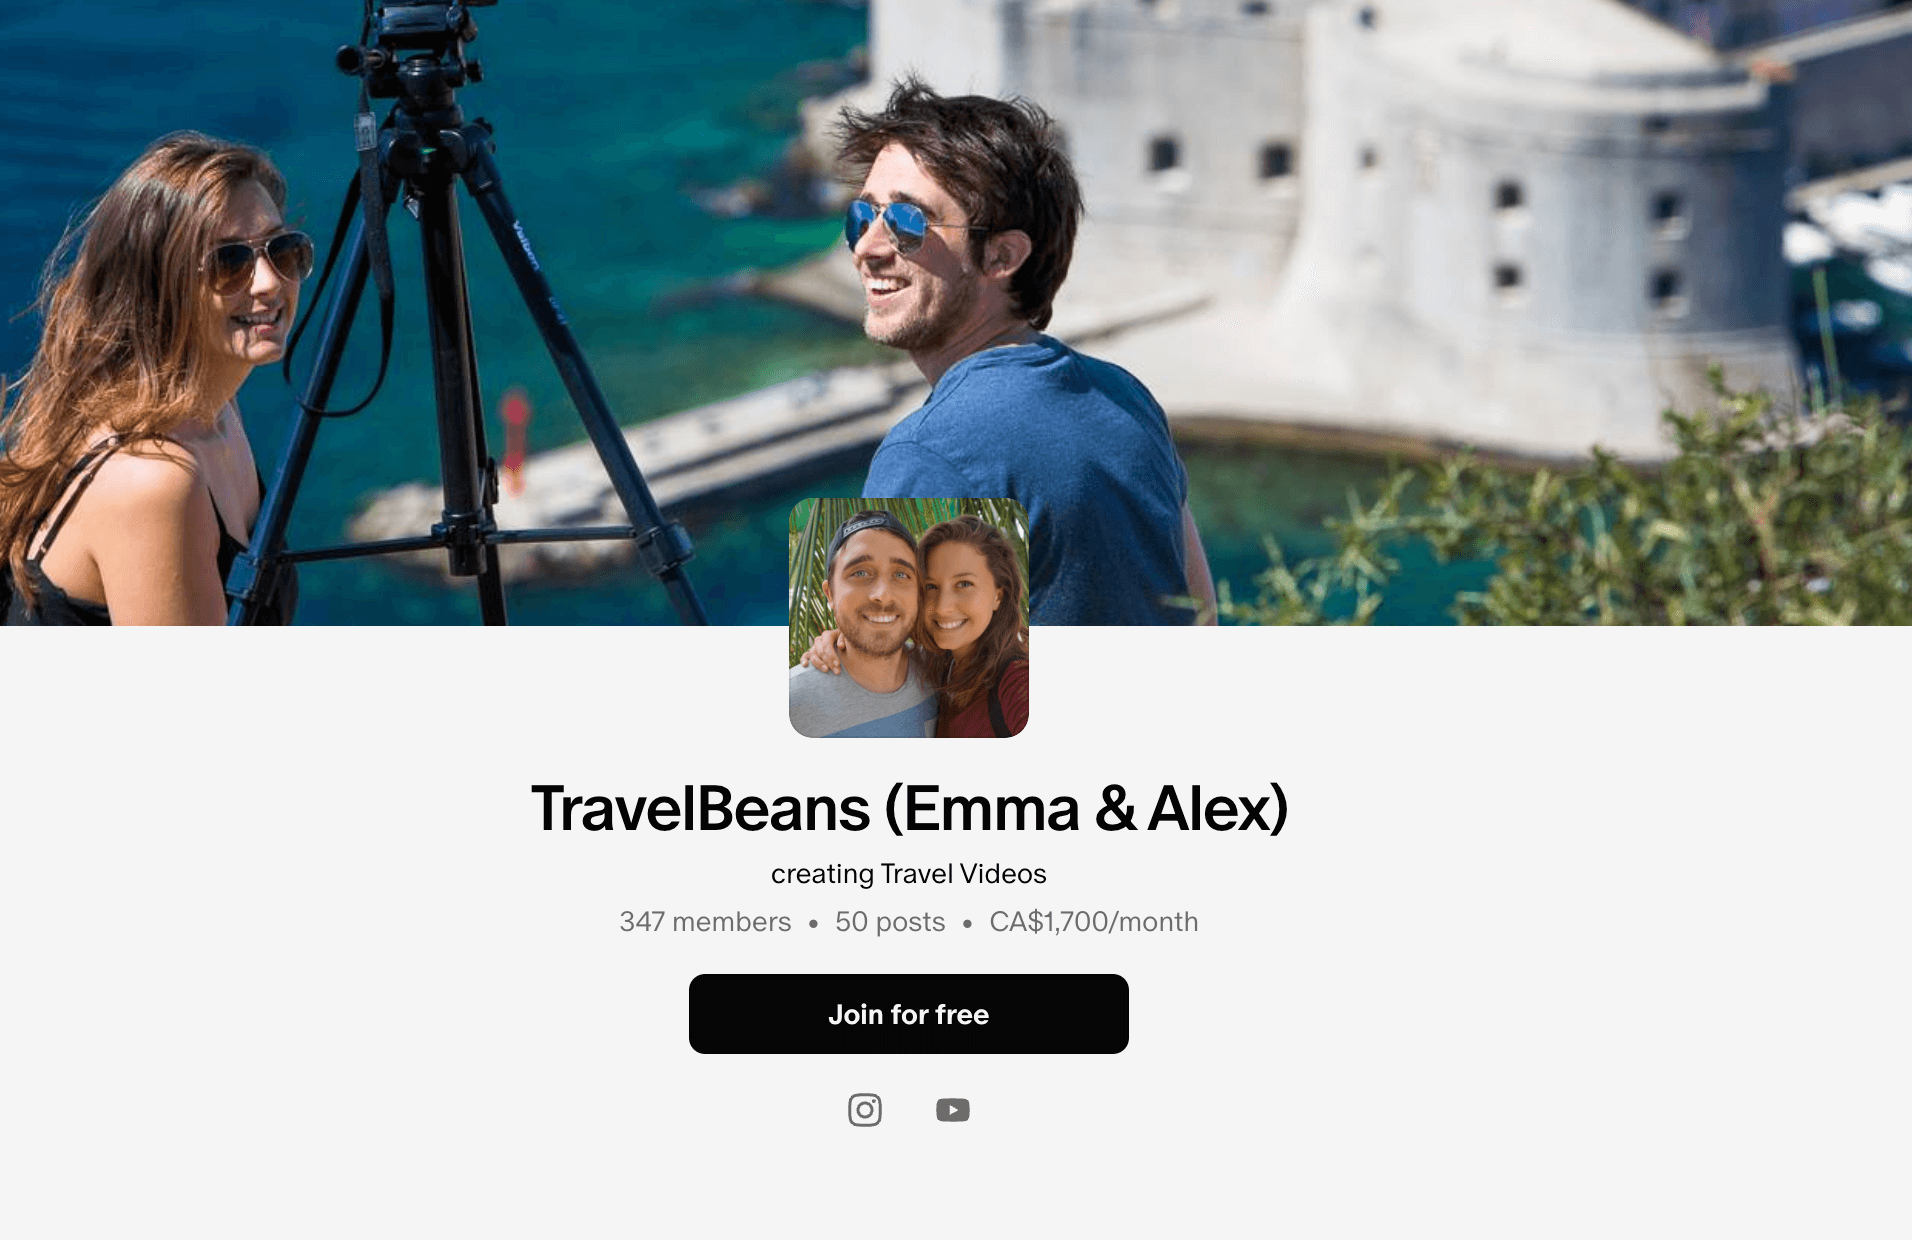 The Patreon page for TravelBeans